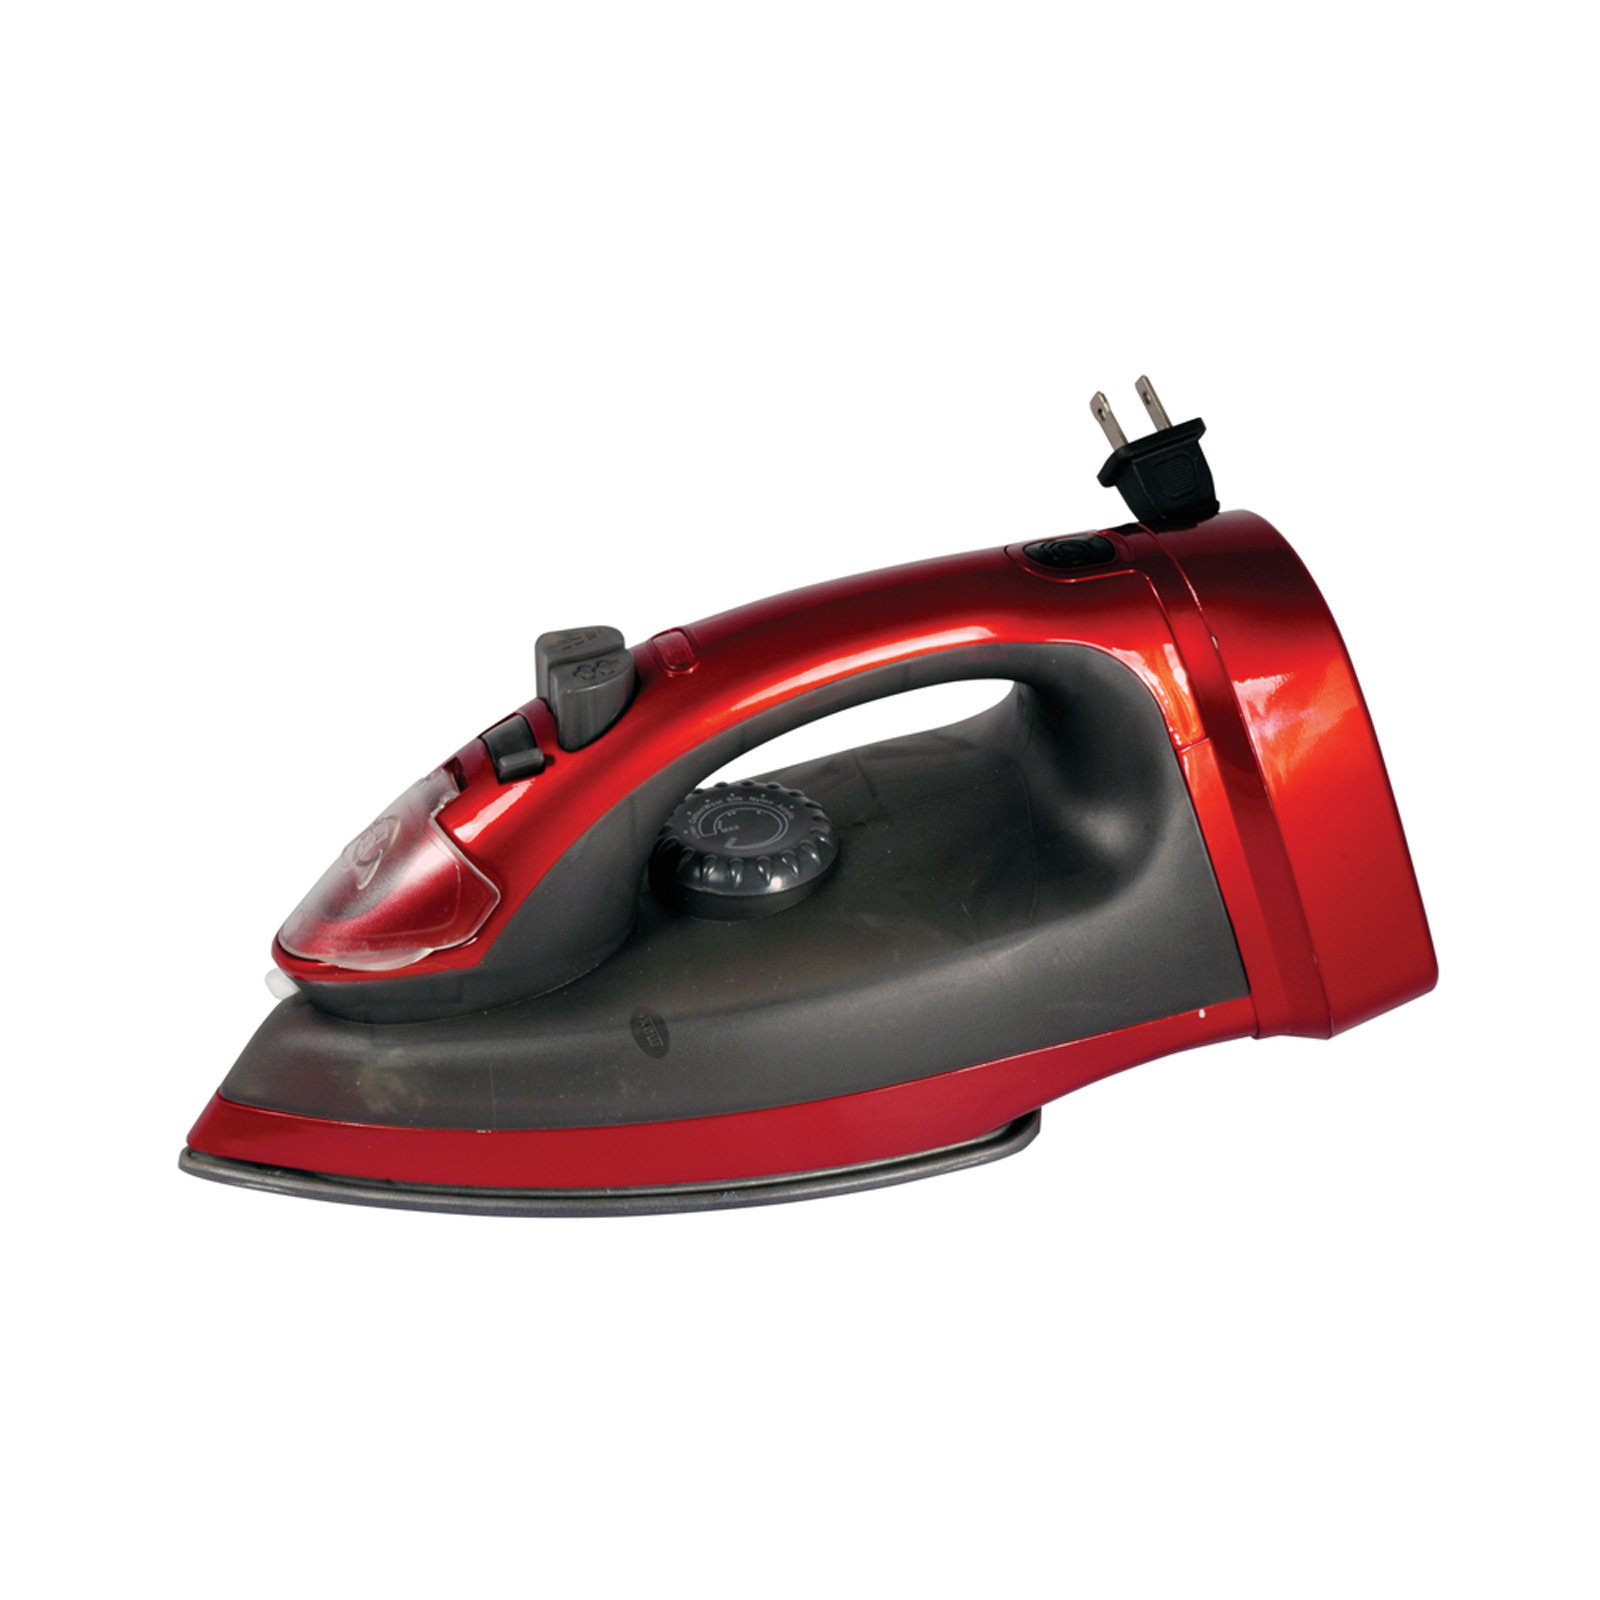 Black + Decker Classic Iron with Aluminum Soleplate & Reviews